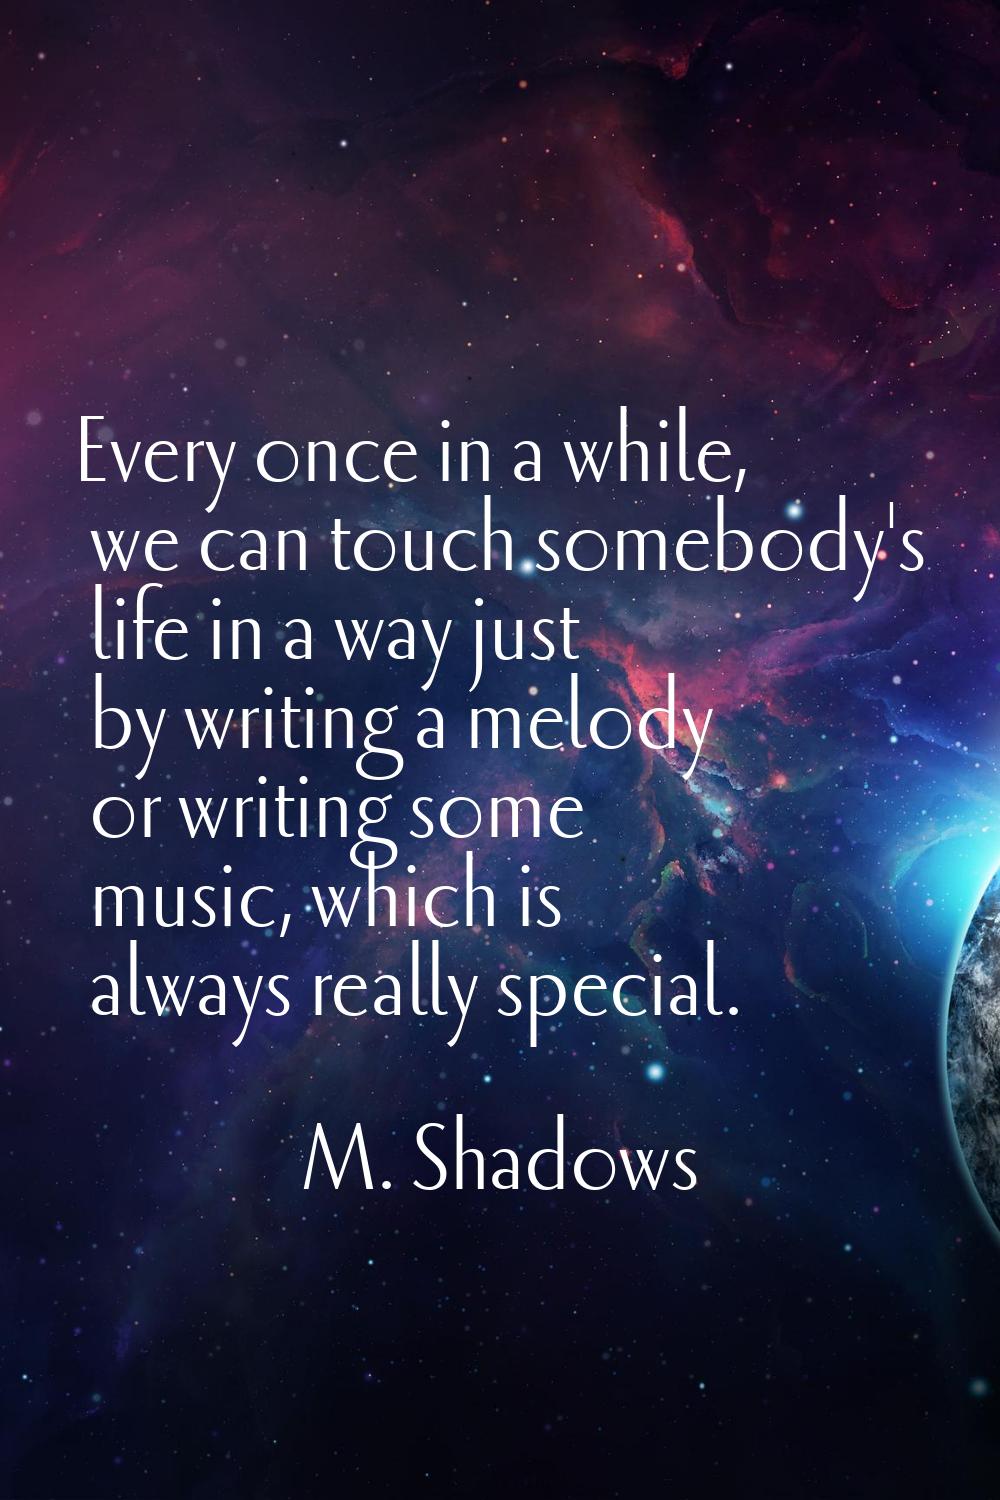 Every once in a while, we can touch somebody's life in a way just by writing a melody or writing so